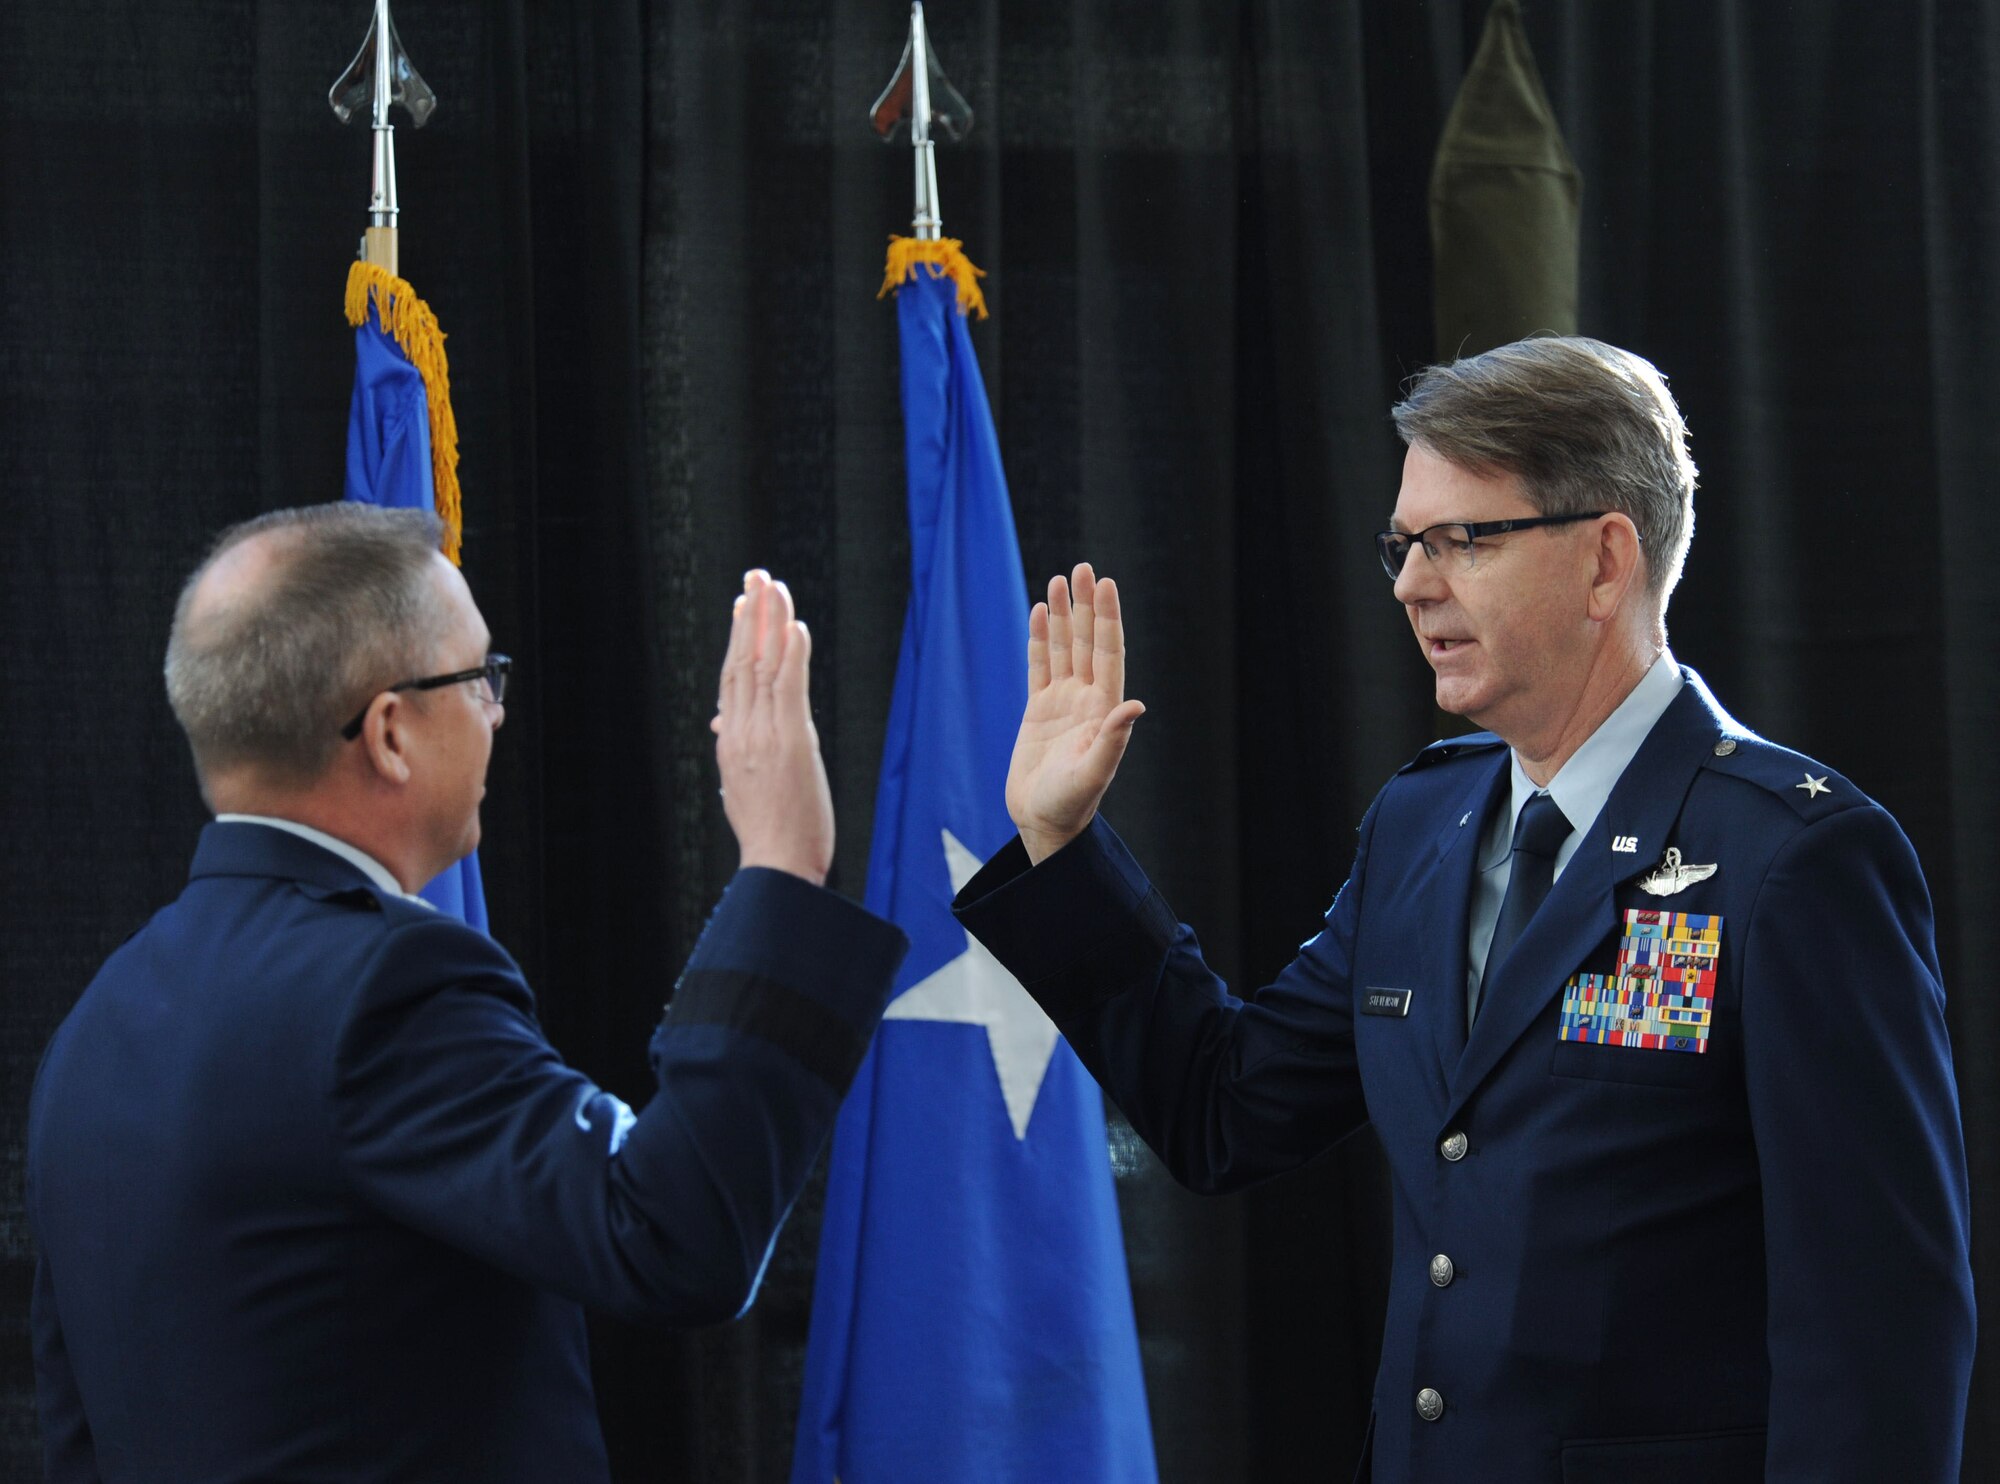 U.S. Air Force Brig. Gen. James “Bob” Stevenson Jr. is administered the Oath of Office by Maj. Gen. Daryl Bohac, Nebraska adjutant general, following his promotion to general officer and assumption of the position of assistant adjutant general for air of the Nebraska Air National Guard during a formal ceremony held Dec. 2, 2016 at the Nebraska Joint Force Headquarters in Lincoln, Nebraska. All Airmen take an oath upon entry into the service. Officers take the Oath of Office upon commissioning and renew that oath with each promotion. Enlisted members take the Oath of Enlistment upon entry and again each time they re-enlist.